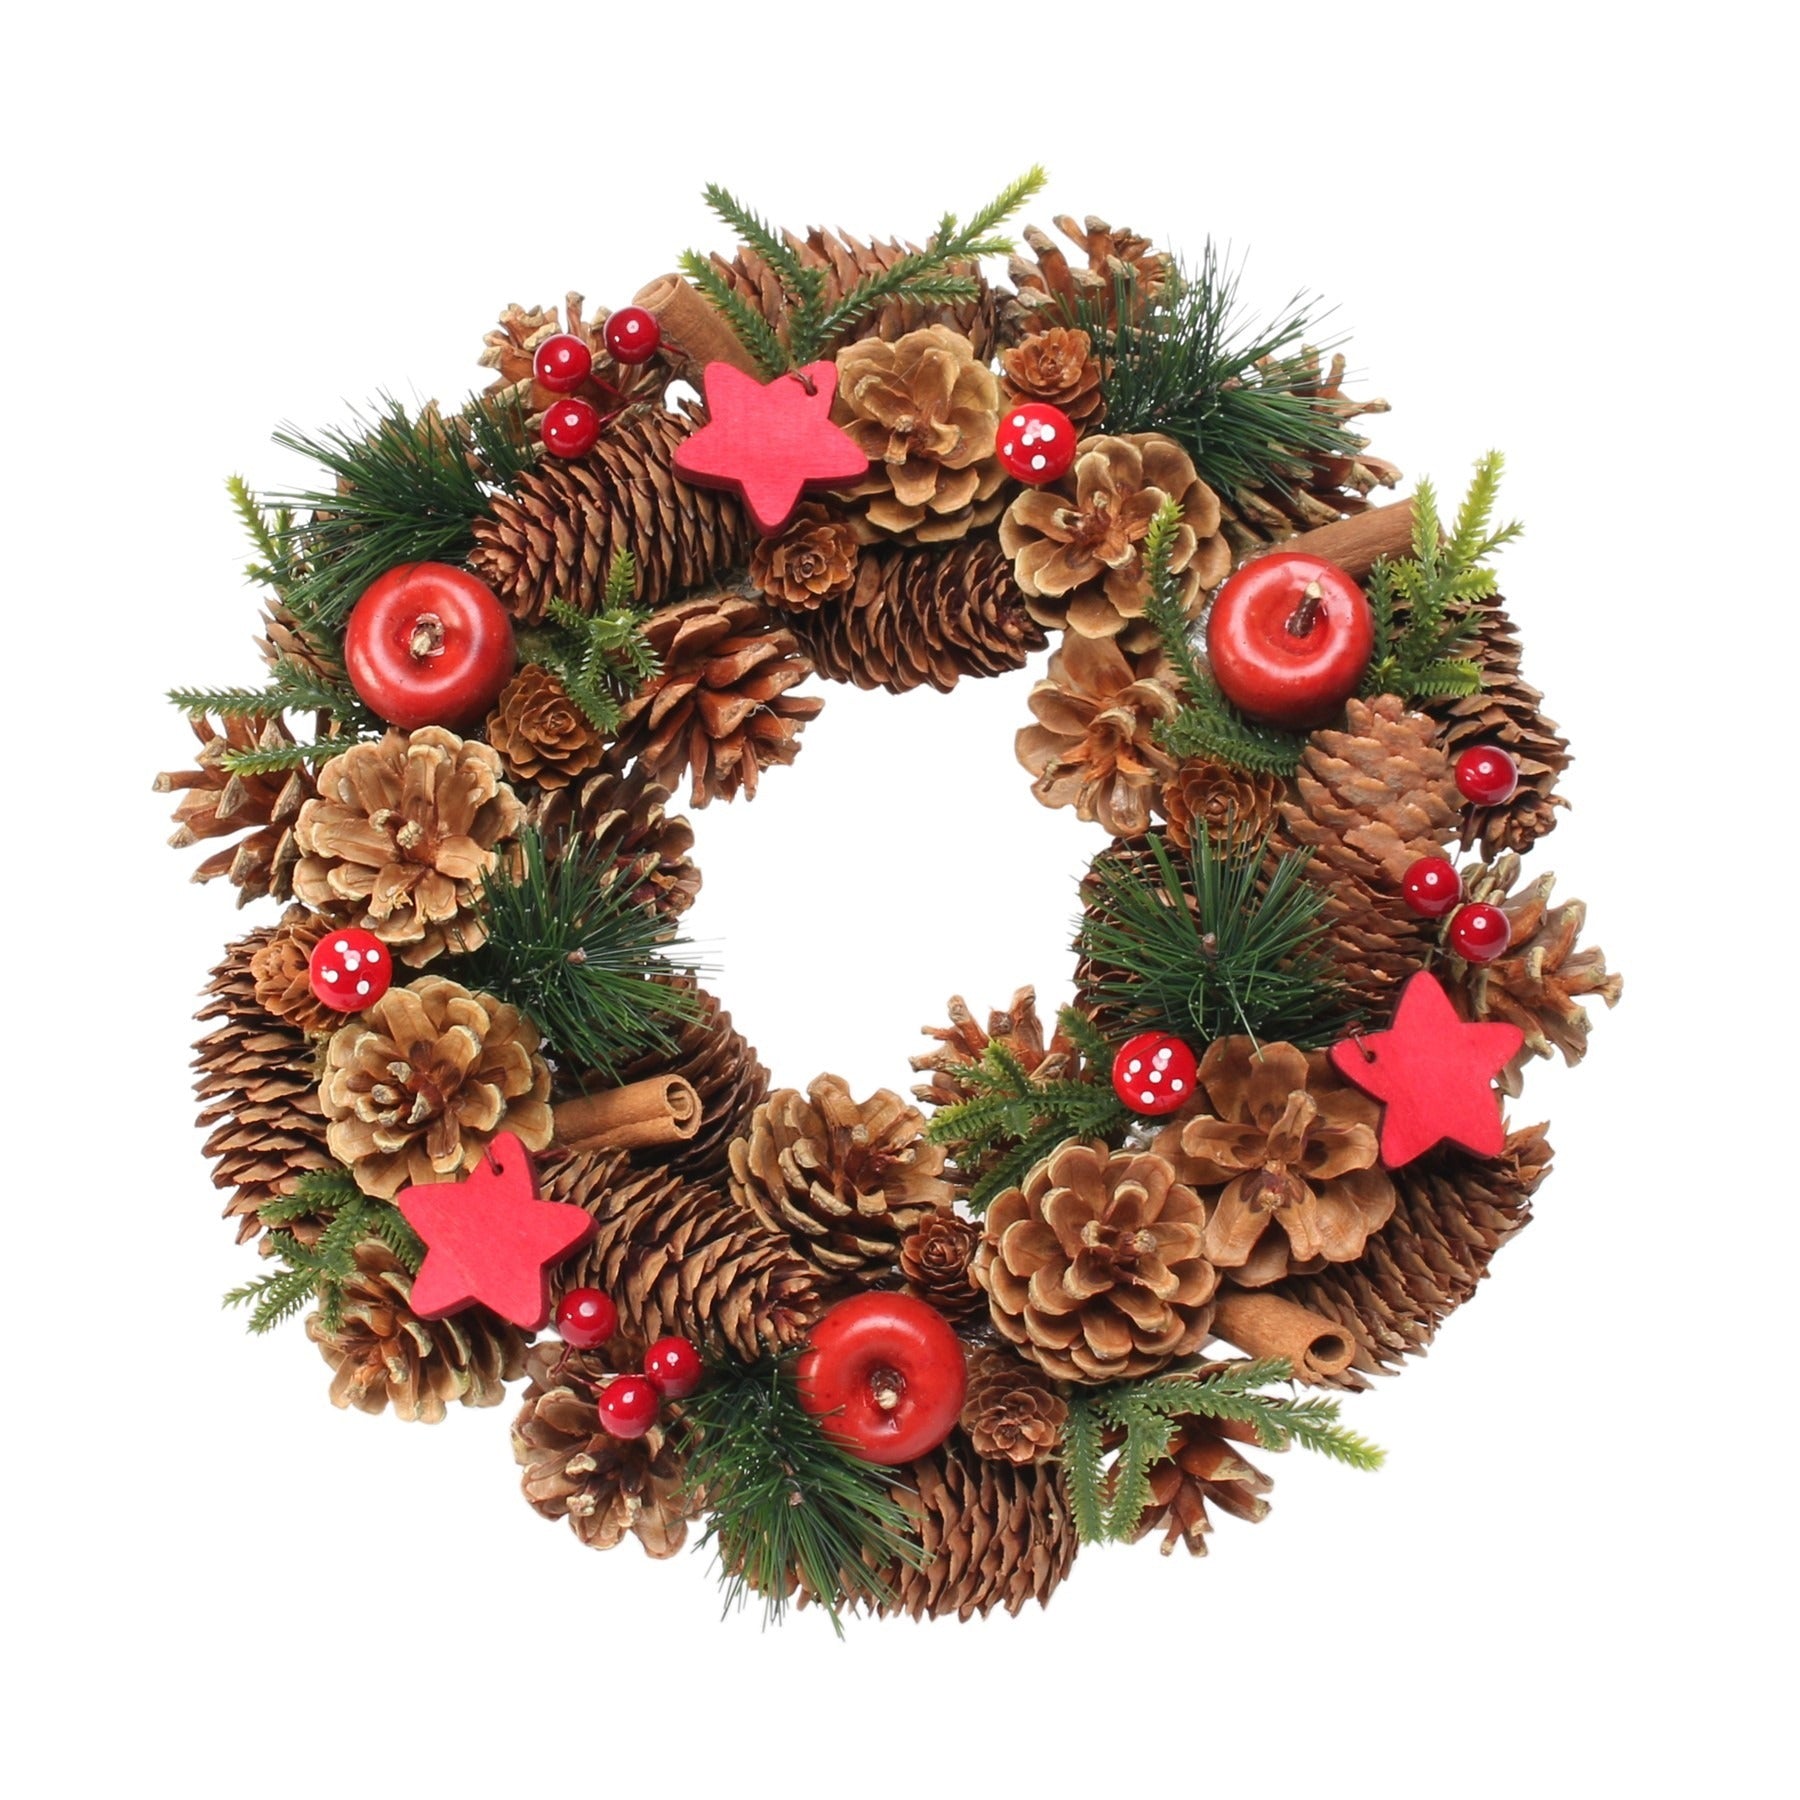 View Woodland Natural Wreath with Red Stars information